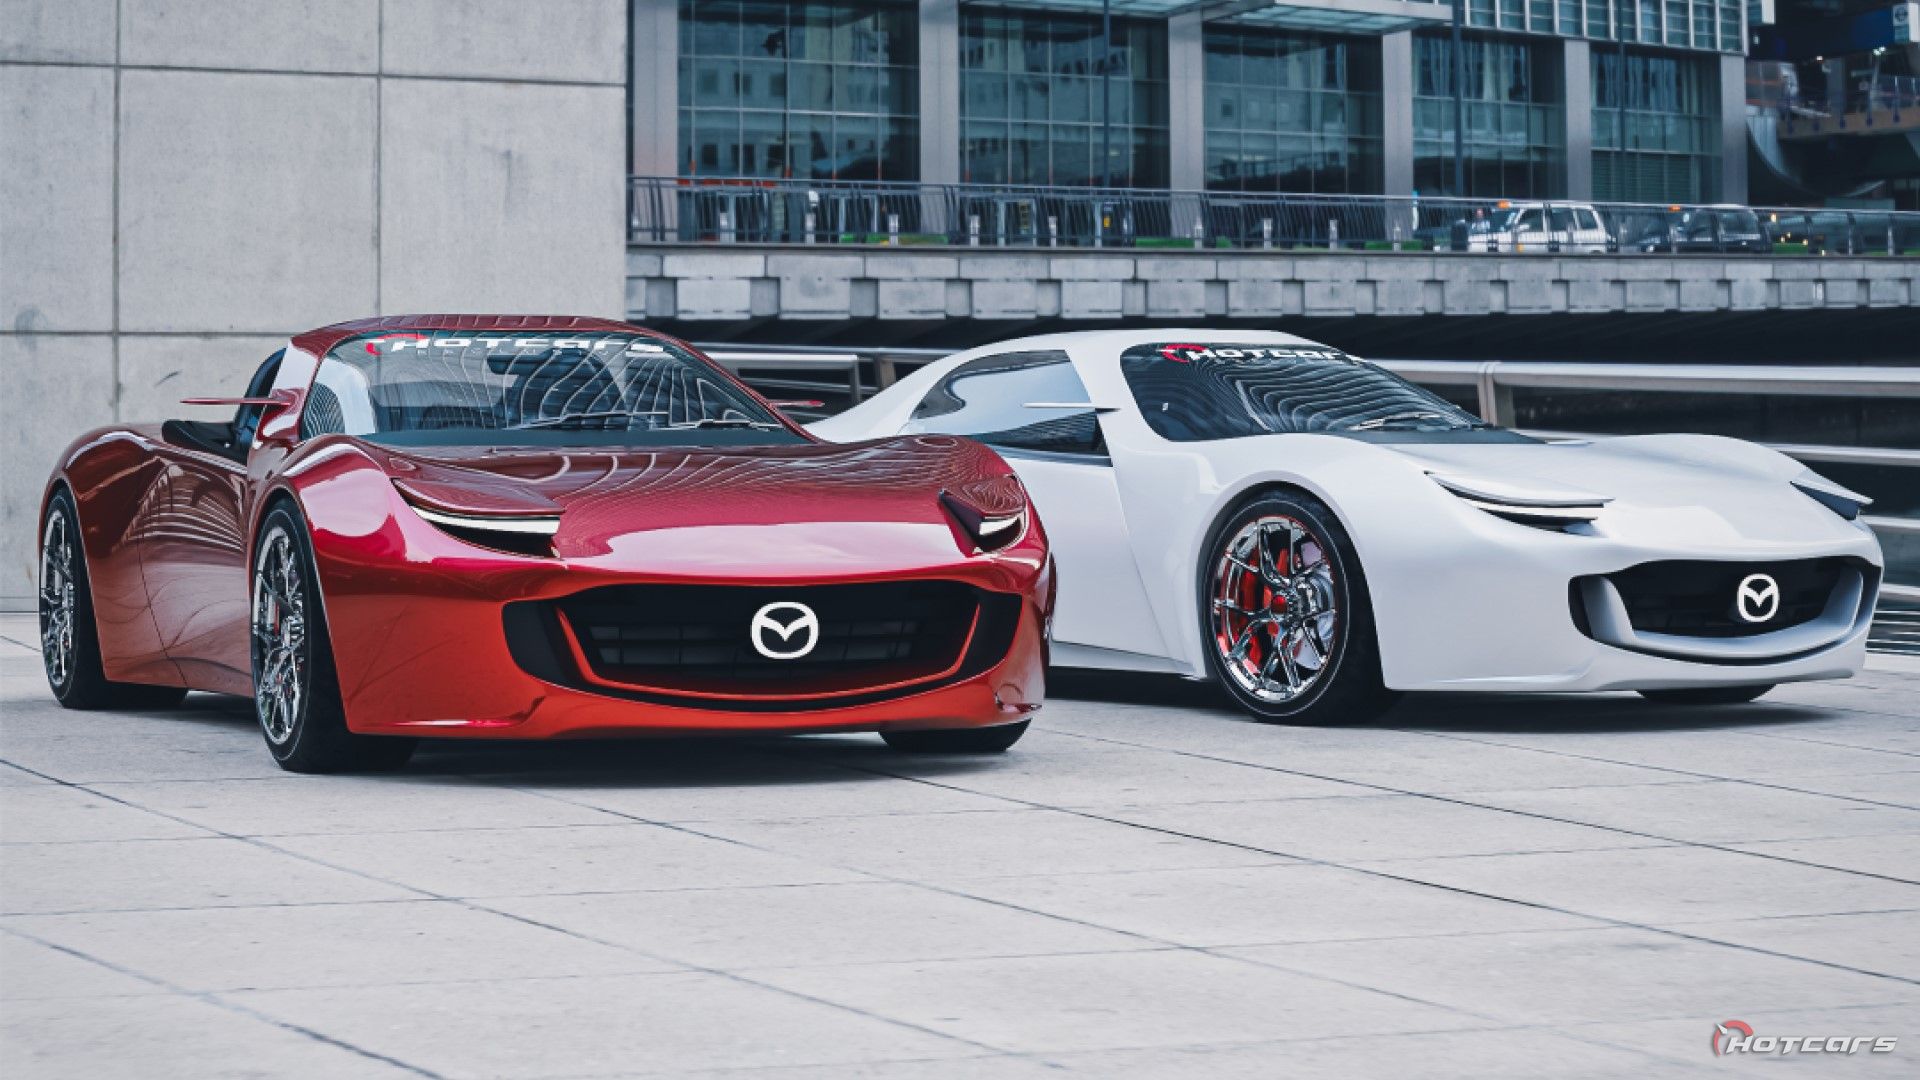 HotCars Car Renders Mazda MX5 EV Concept, front quarter view of 2 cars